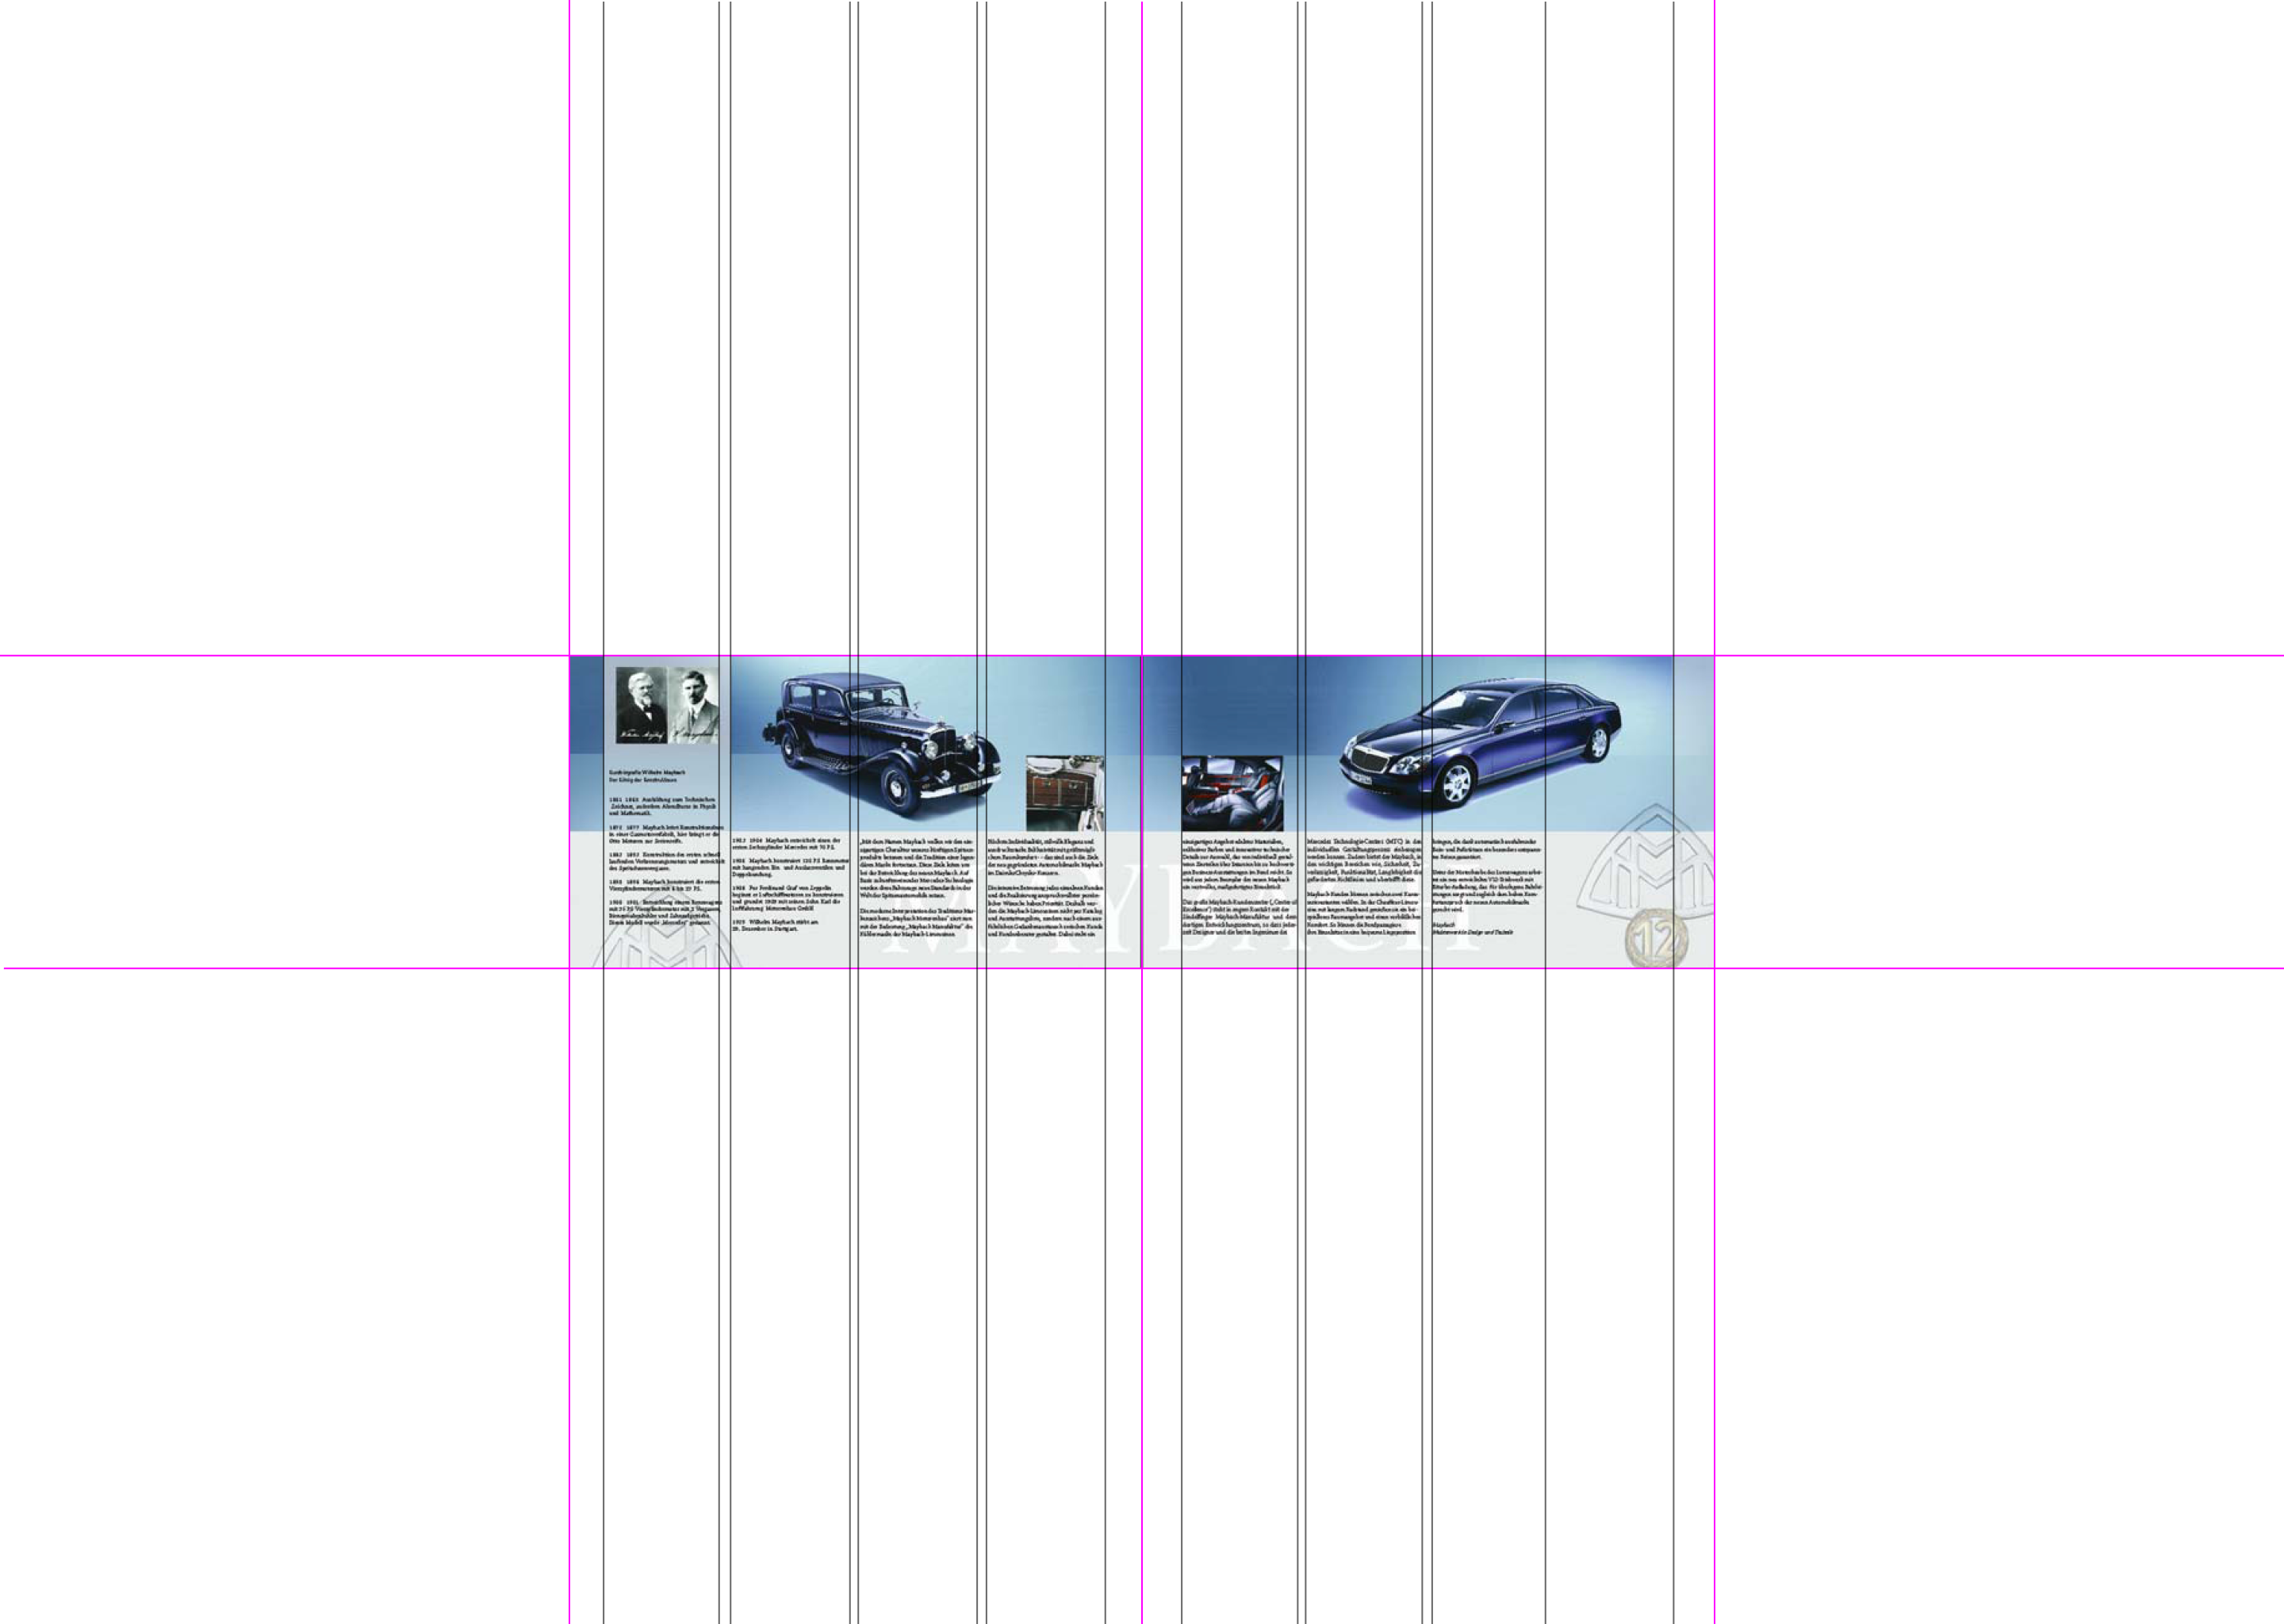 ./images/layout-17.png